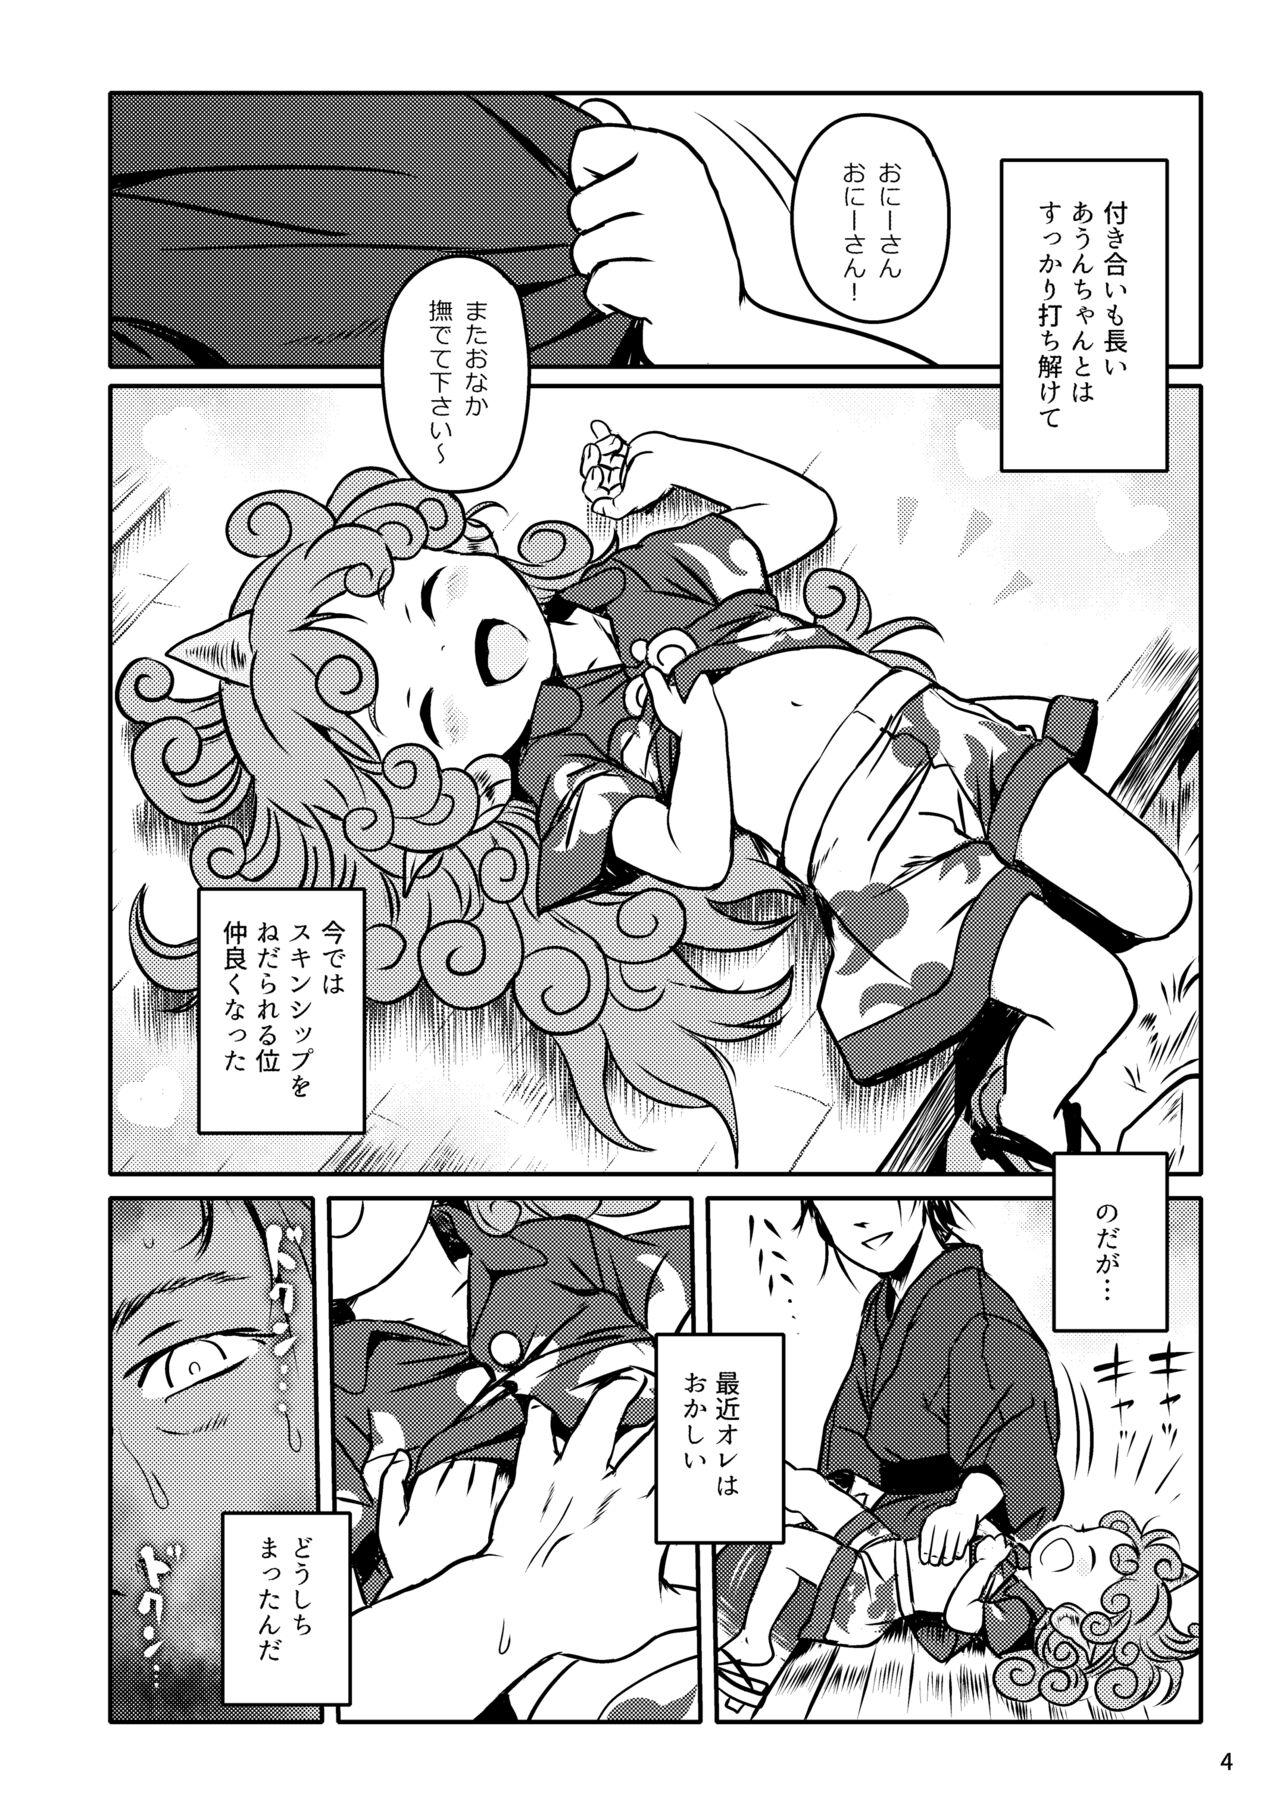 Topless Haratte! Aun-chan! - Touhou project Teenage Sex - Page 4